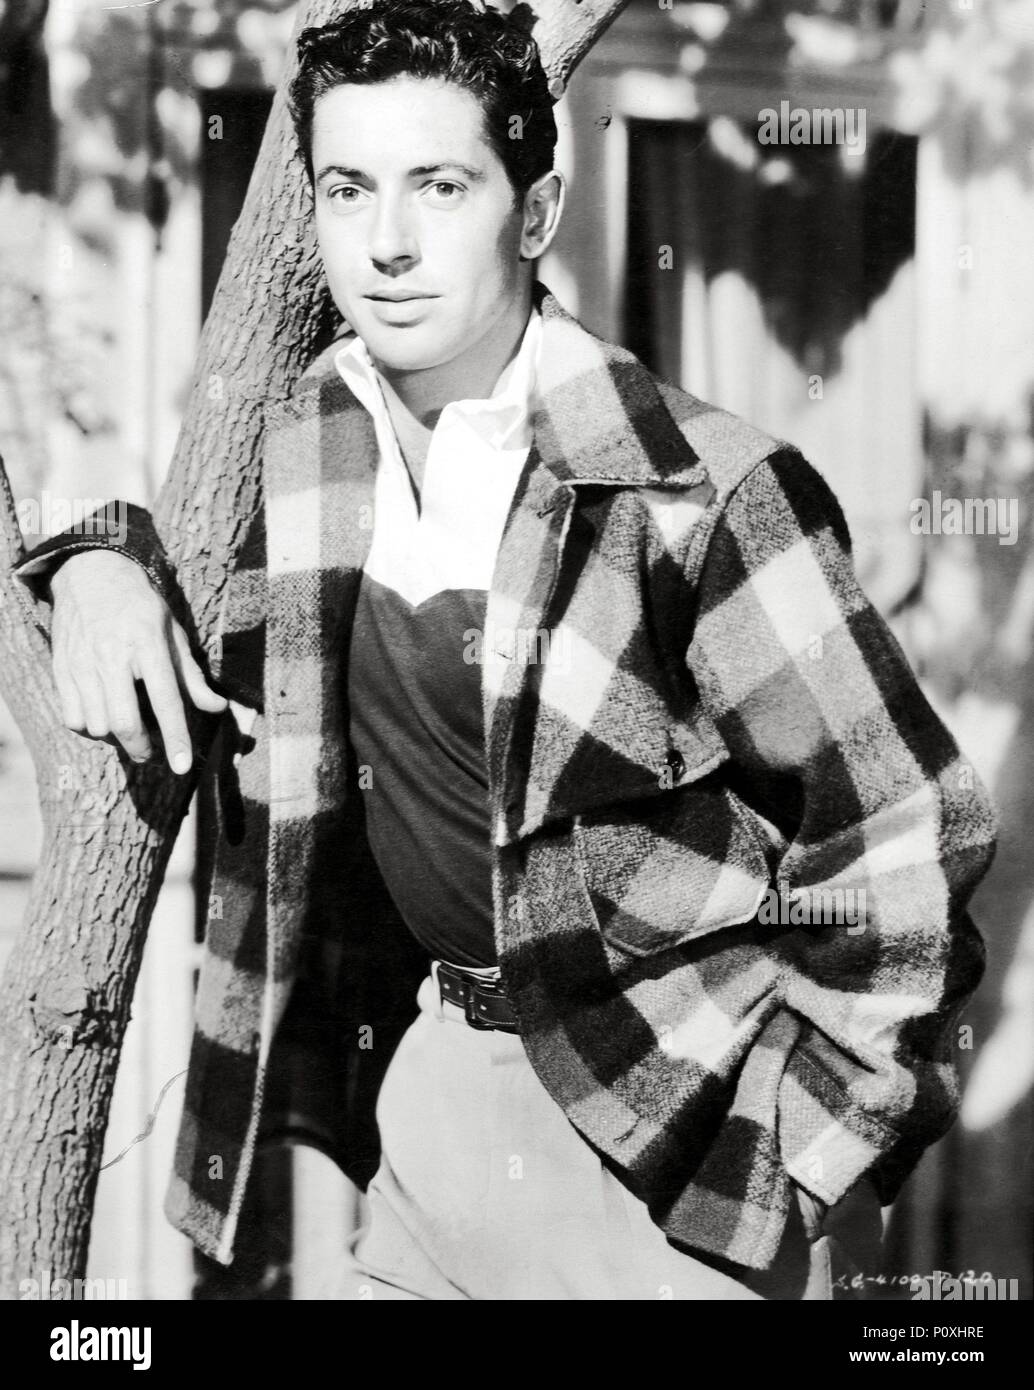 Original Film Title: OUR VERY OWN.  English Title: OUR VERY OWN.  Film Director: DAVID MILLER.  Year: 1950.  Stars: FARLEY GRANGER. Credit: RKO / Album Stock Photo